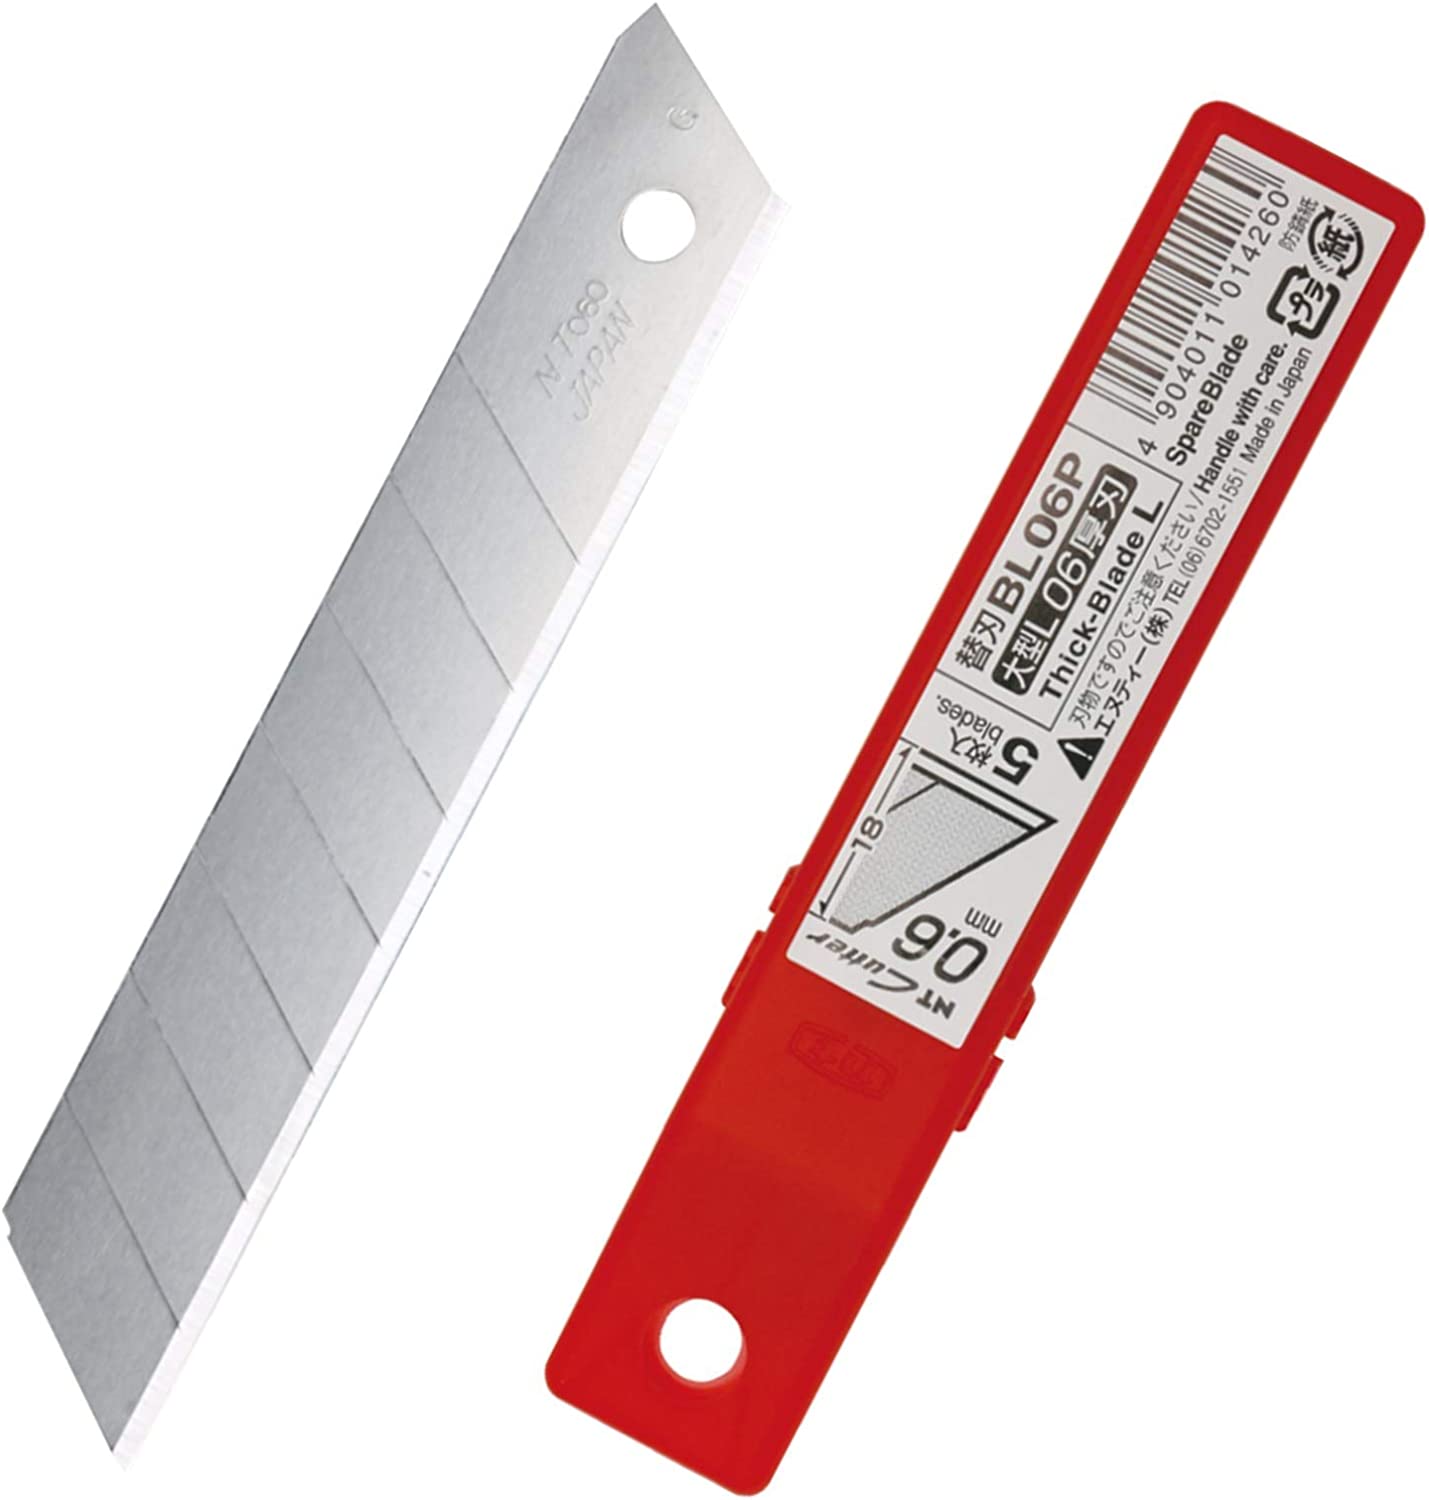 BL-06P Replacement blades for Heavy Blade Cutter (pcs)